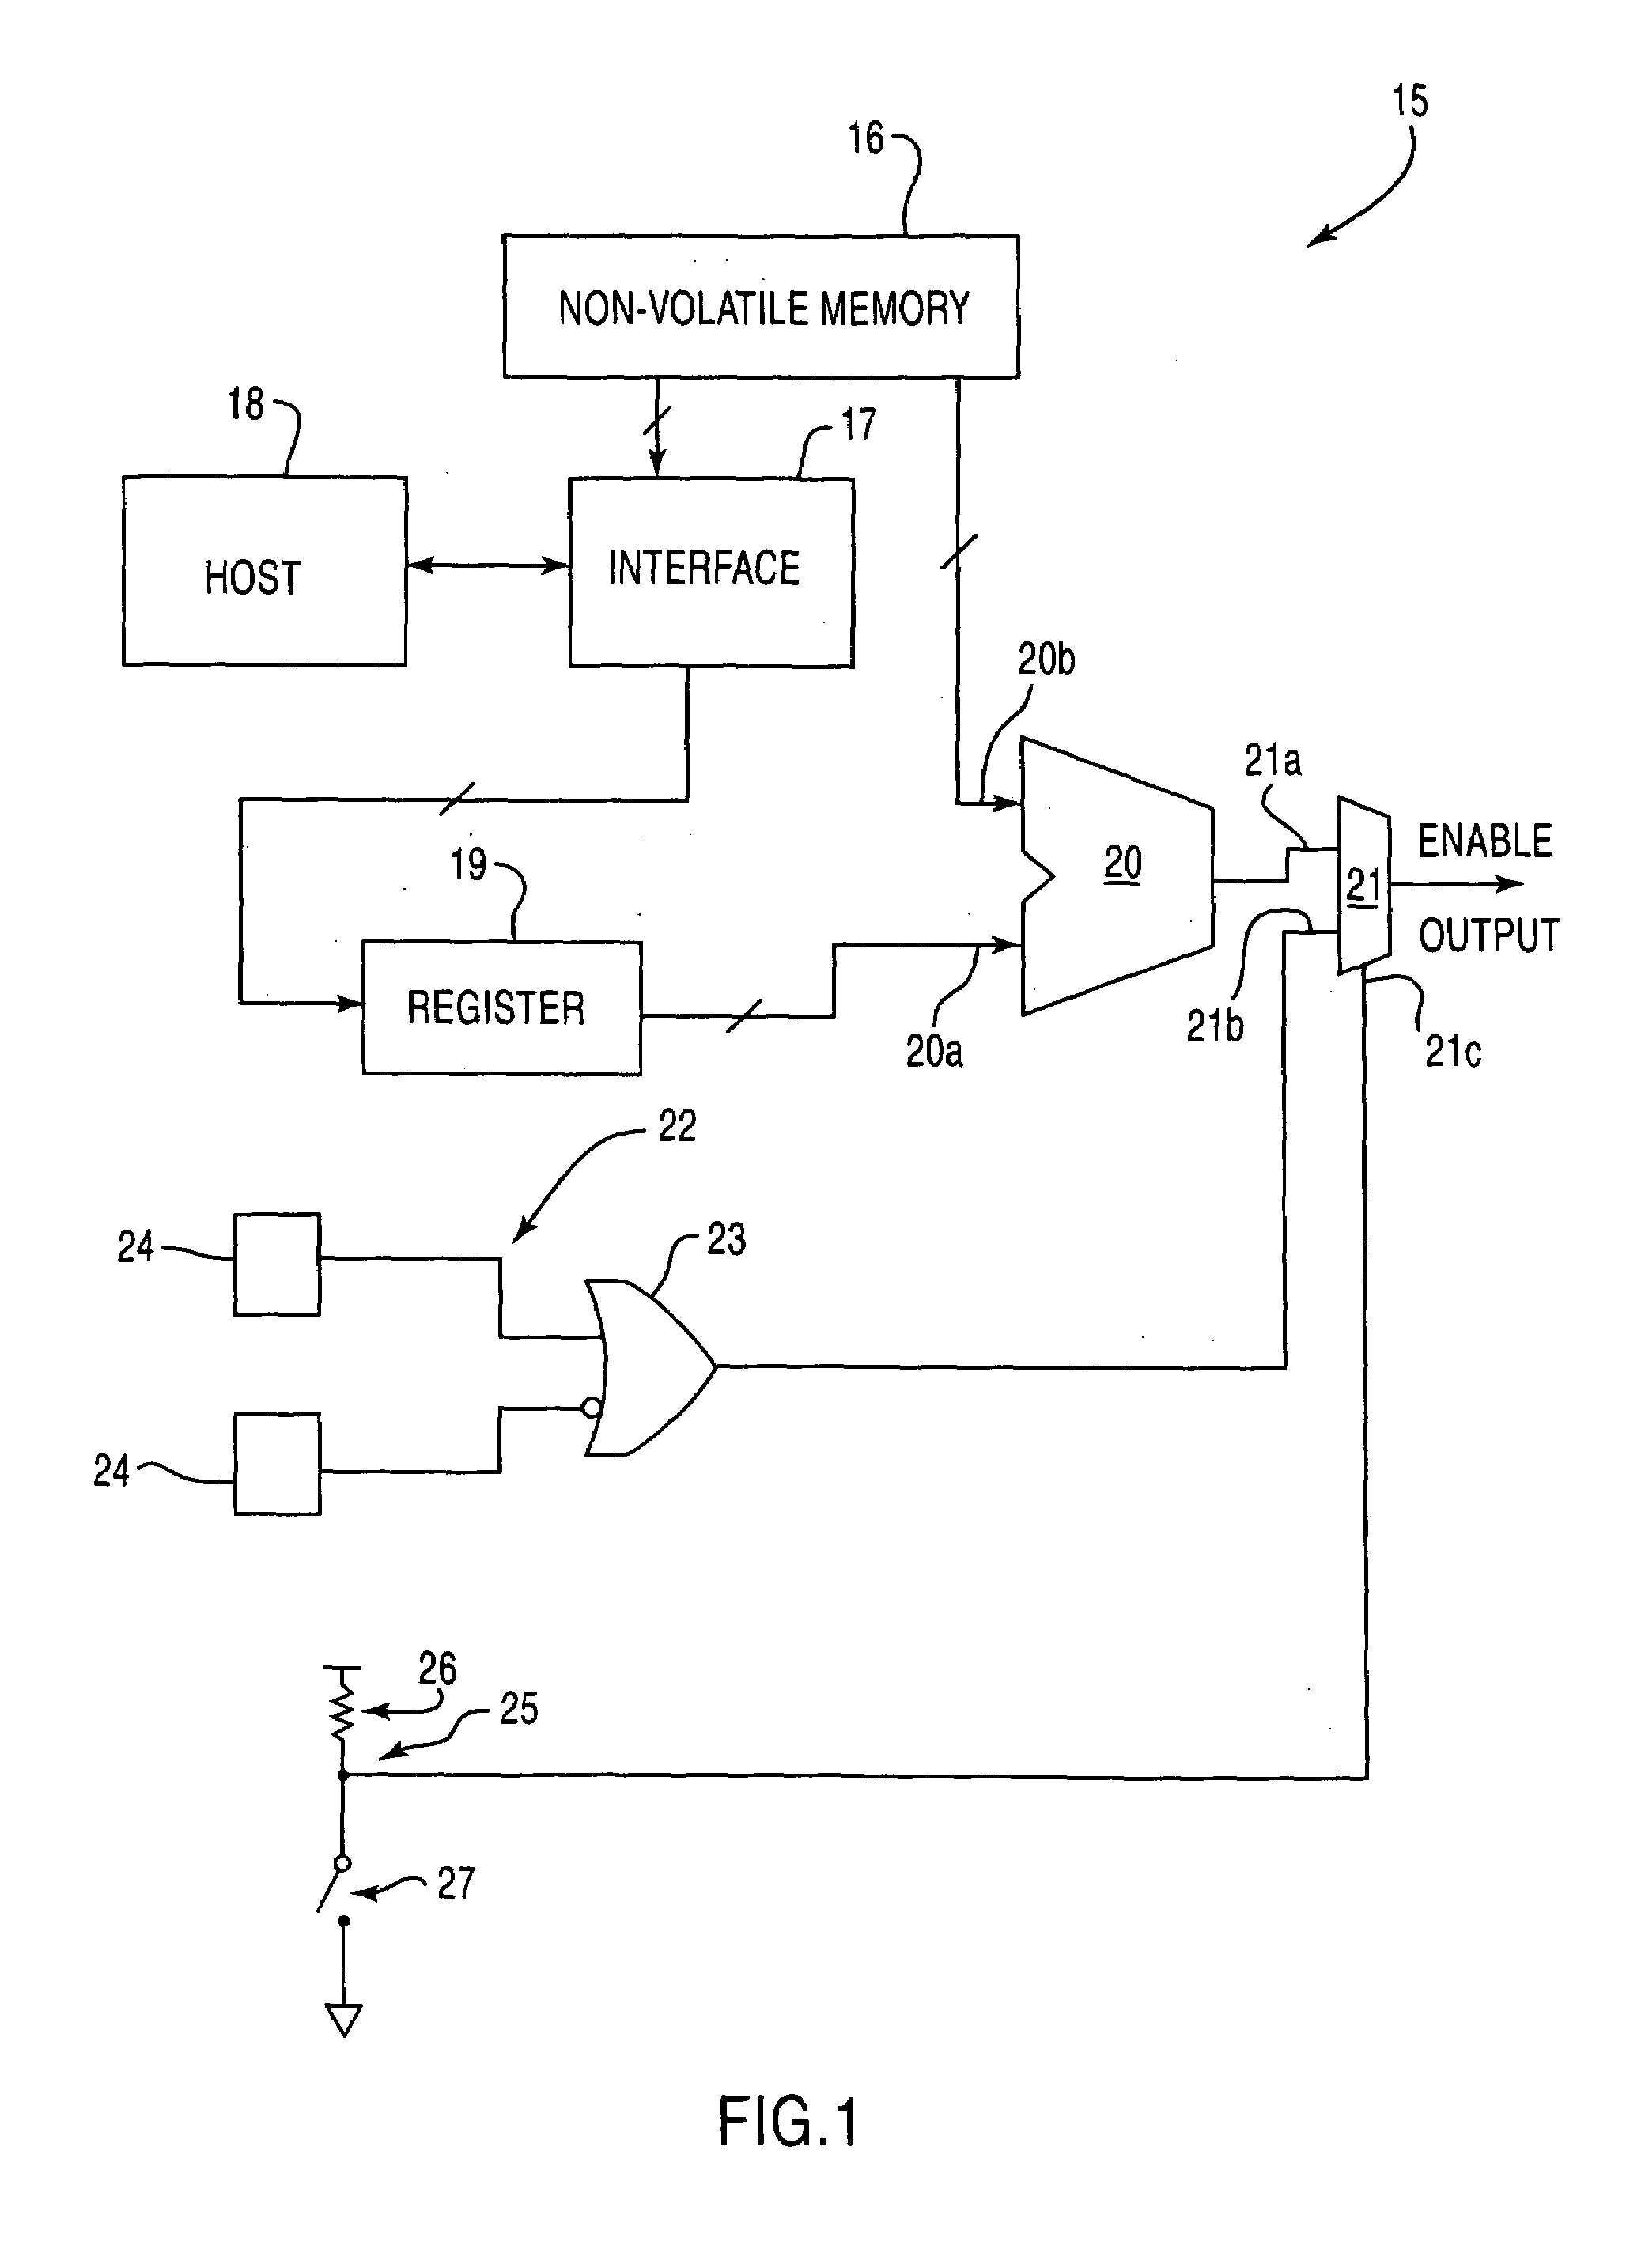 Apparatus and method for secure filed upgradability with hard wired public key